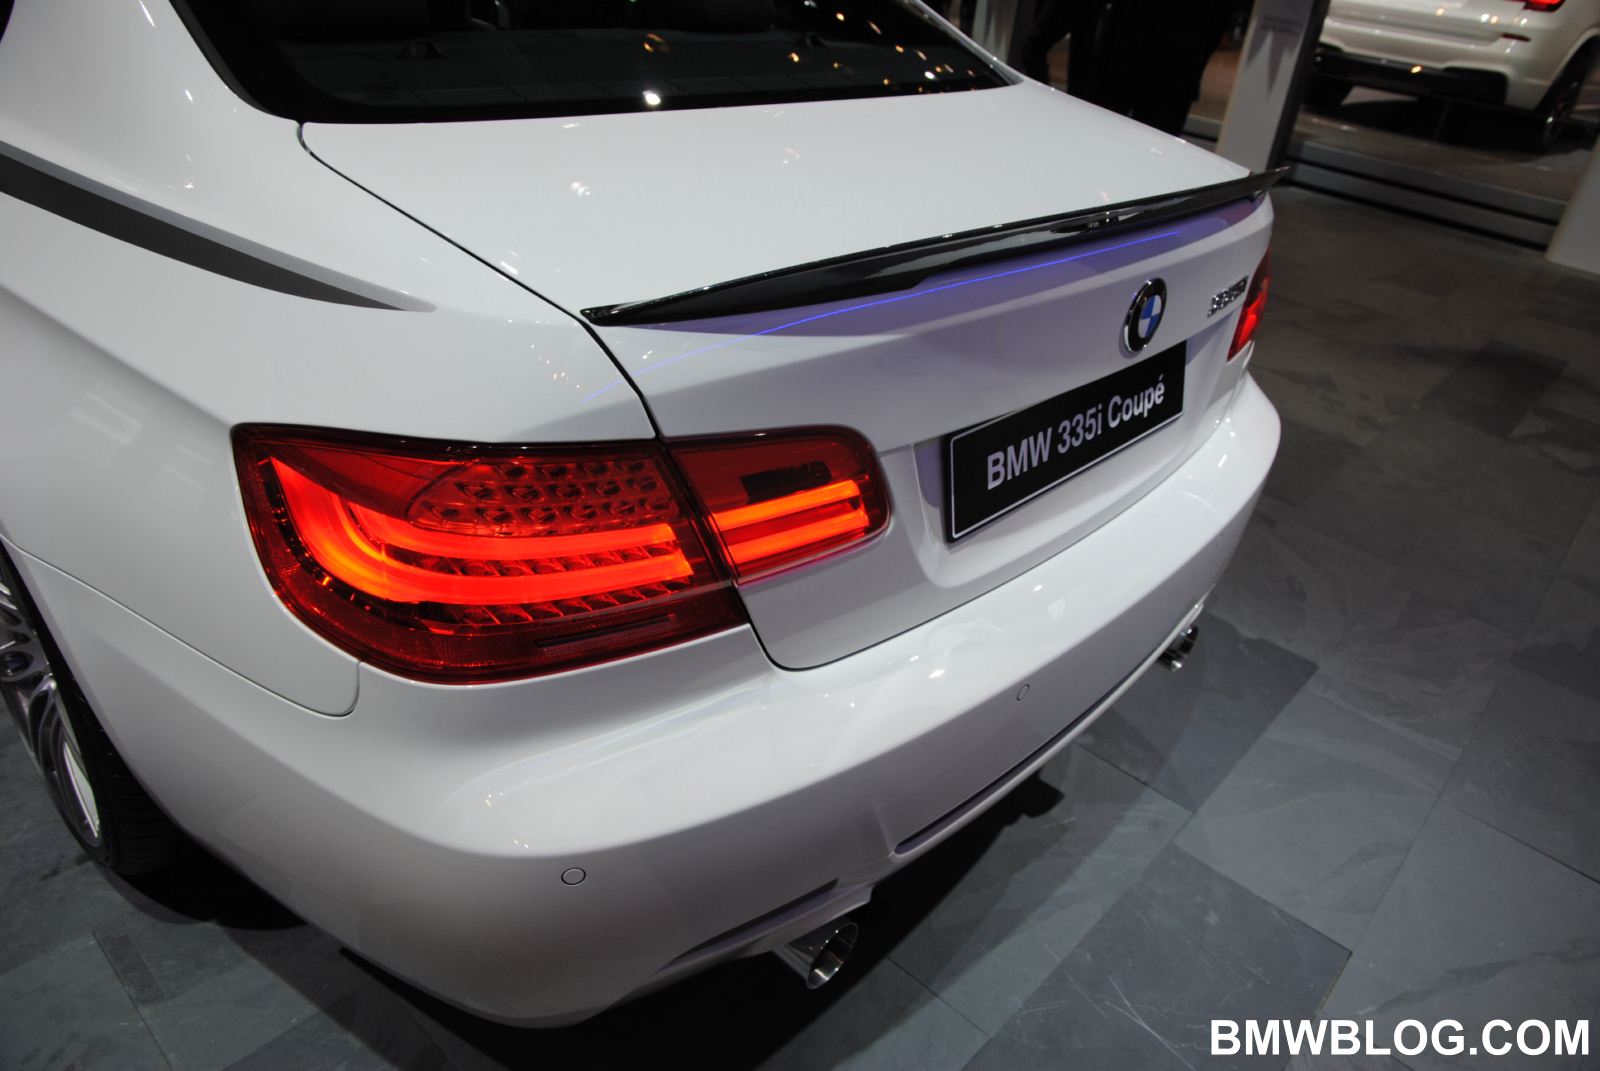 2010 Paris Motor Show: BMW 335i Coupe with parts from BMW Performance